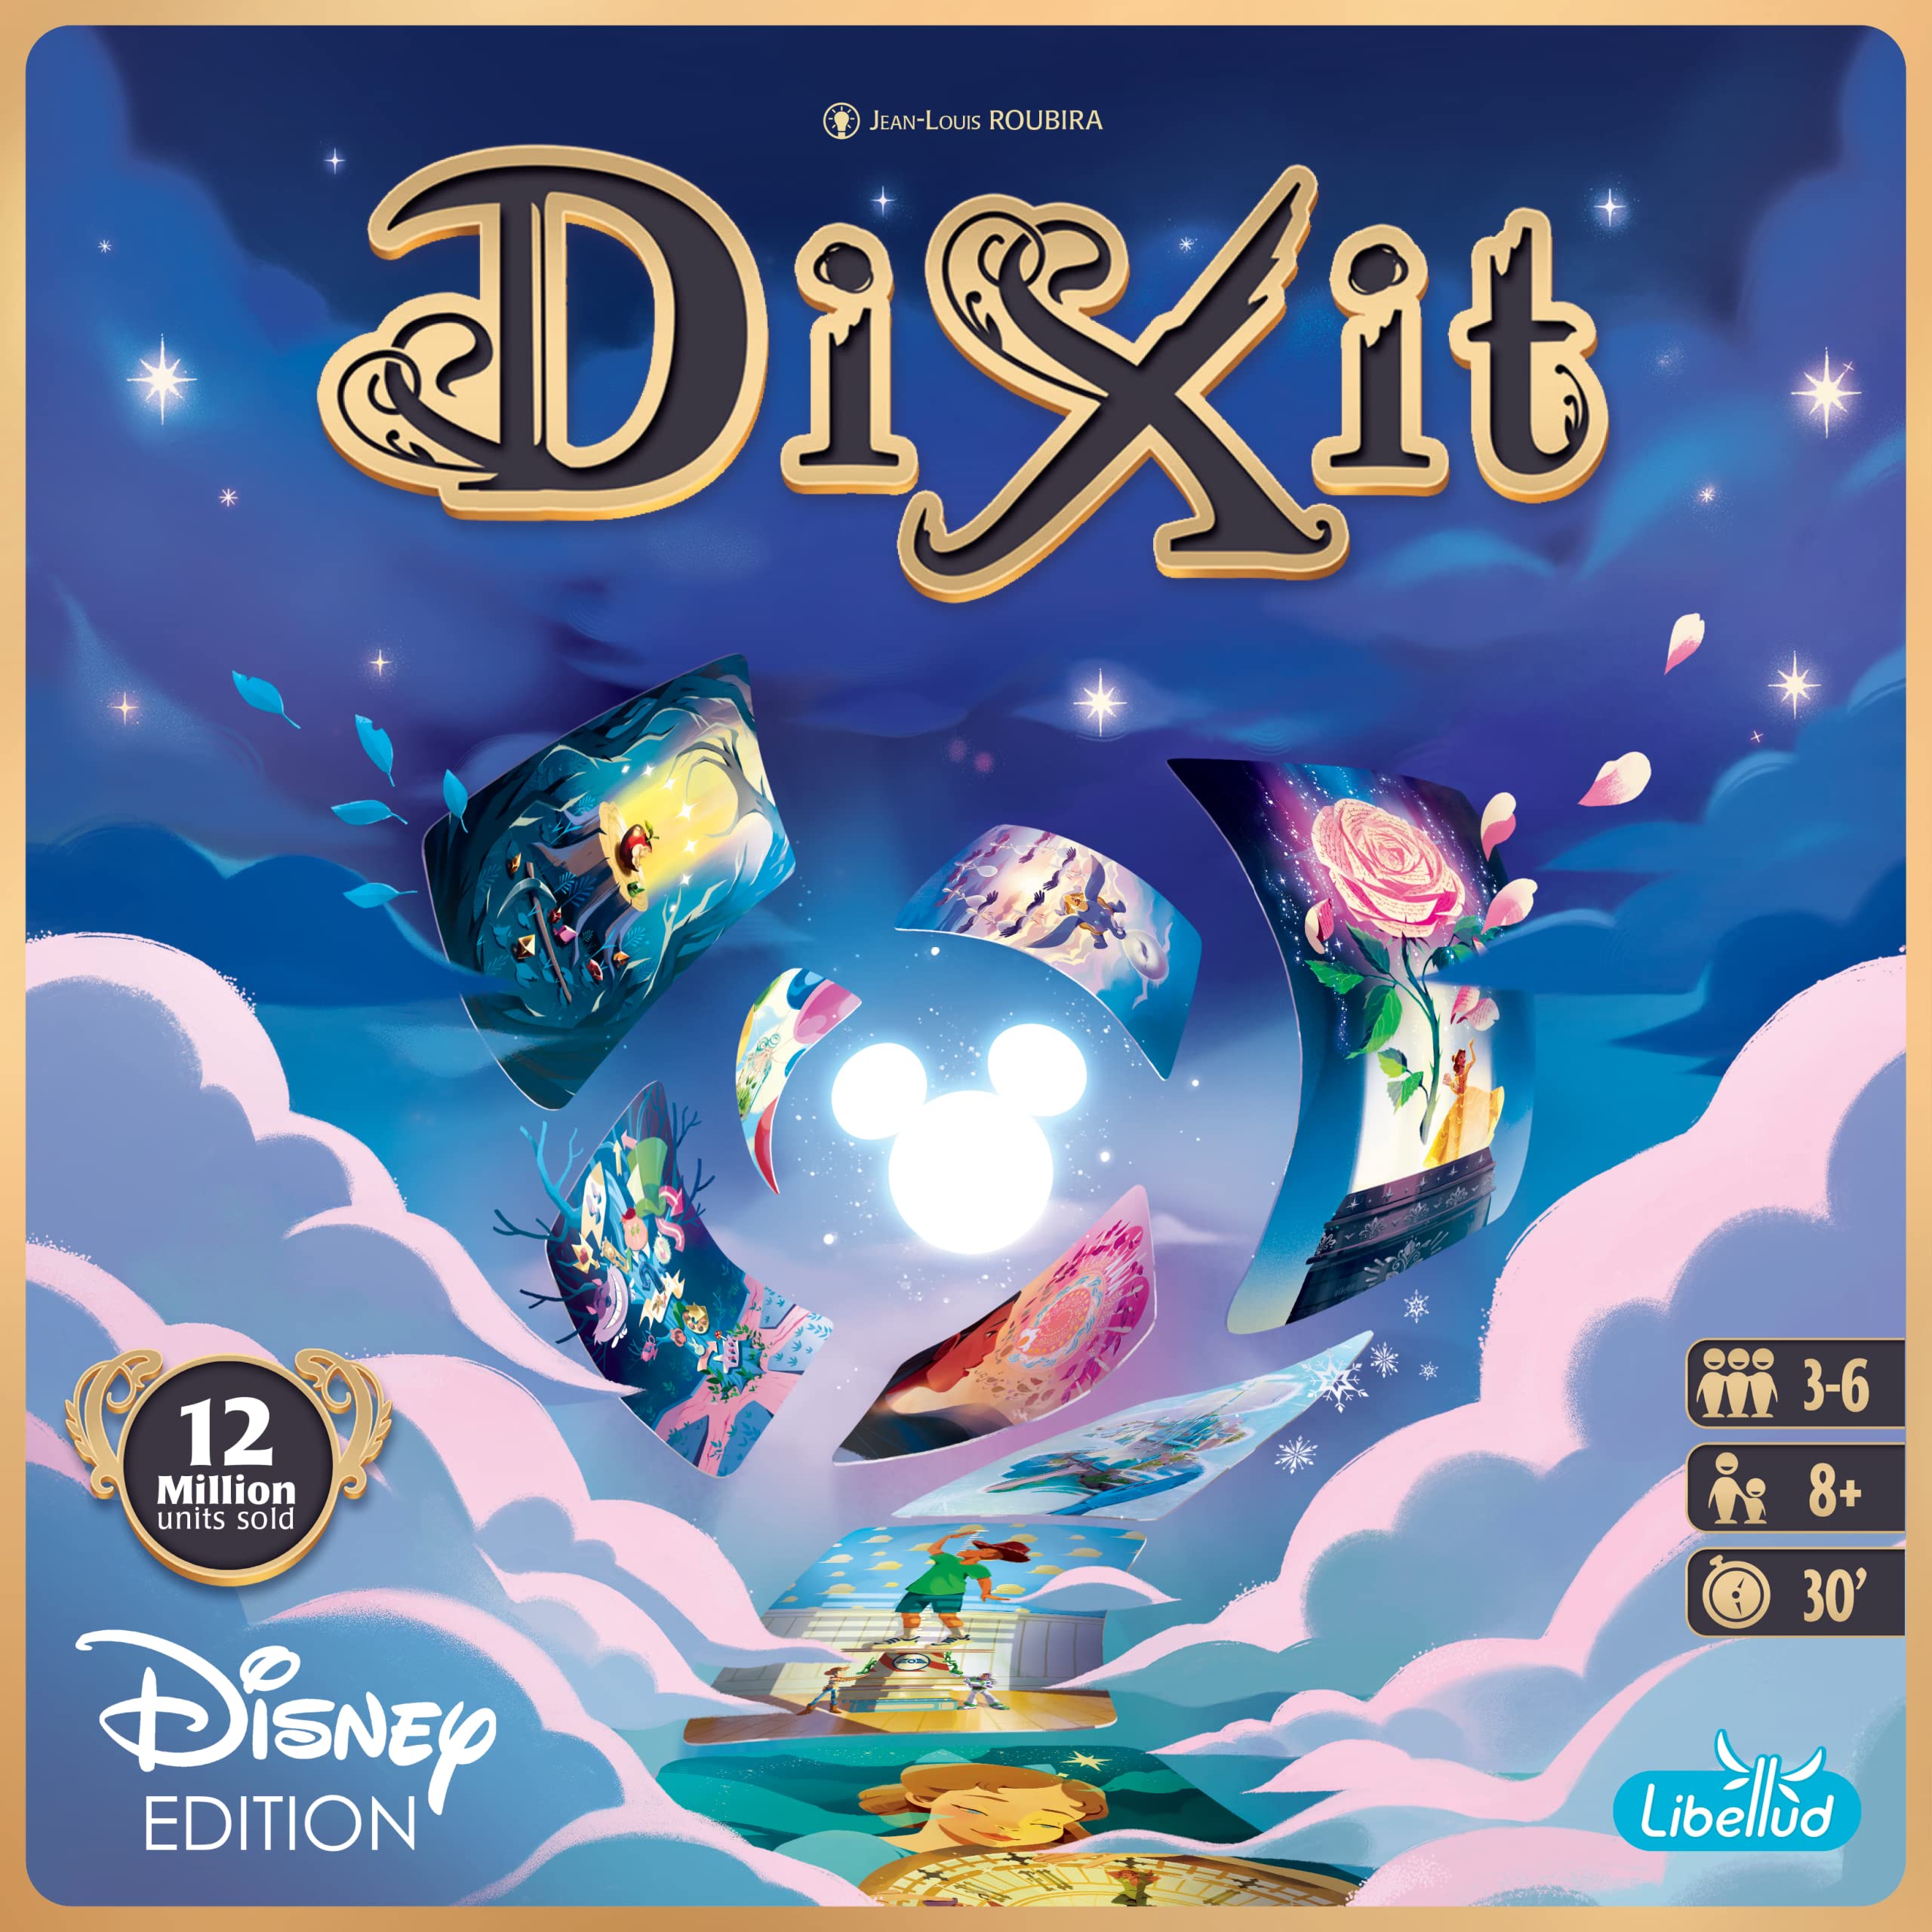 Dixit Disney Edition Board Game - Storytelling Game for Kids and Adults, Fun Game for Family Game Night, Creative Kids Game, Ages 8+, 3-6 Players, 30 Minute Playtime, Made by Libellud